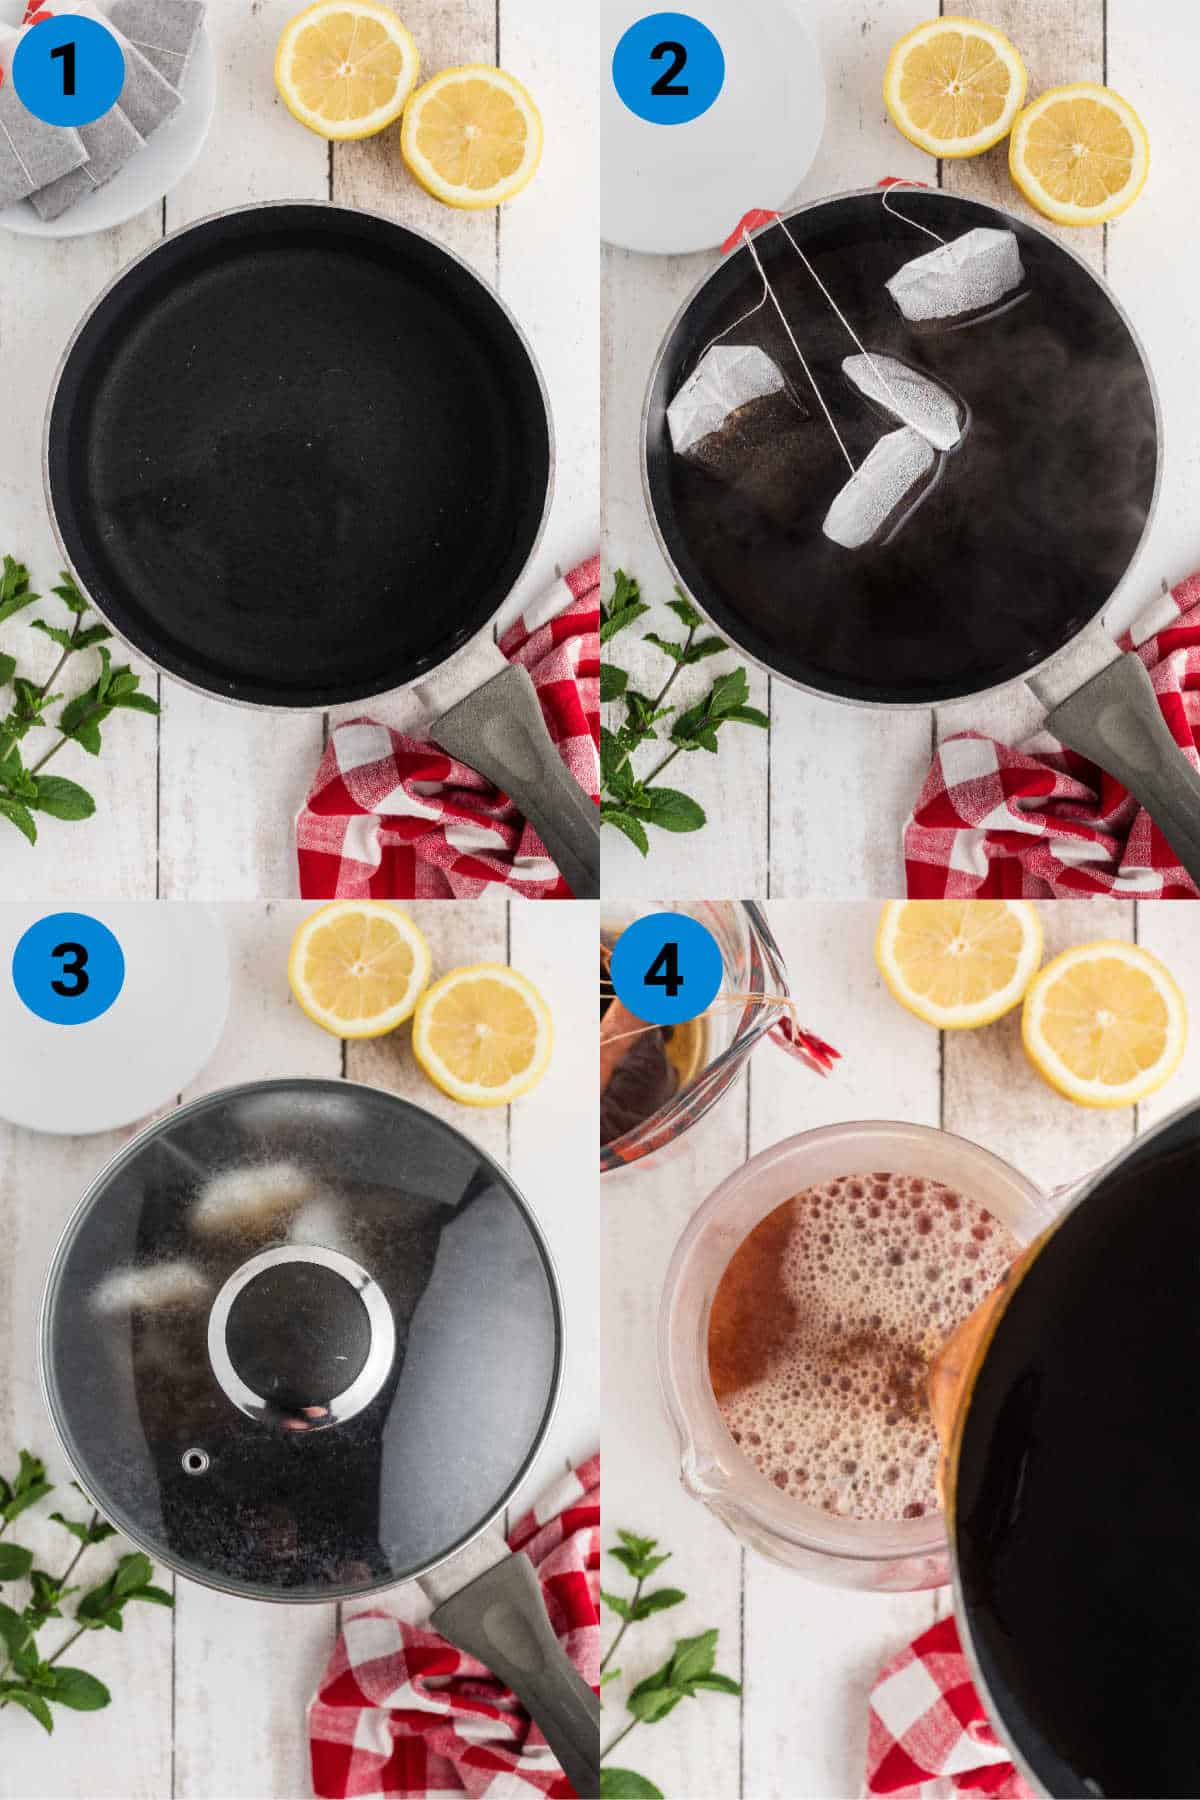 A collage of four images showing how to make sweet tea.